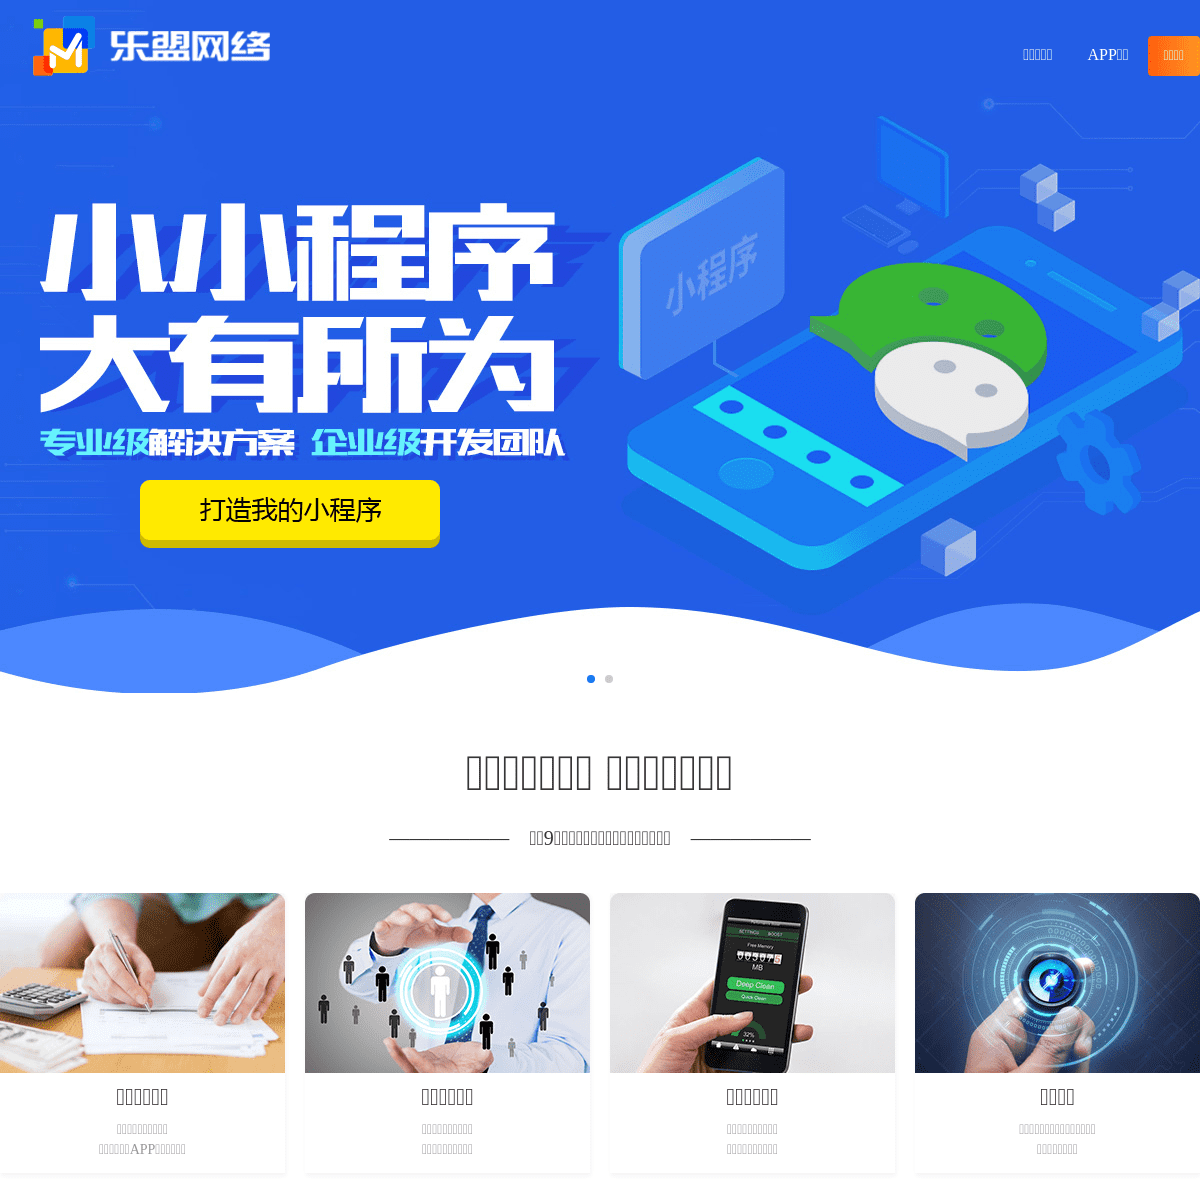 A complete backup of https://fengbao.com